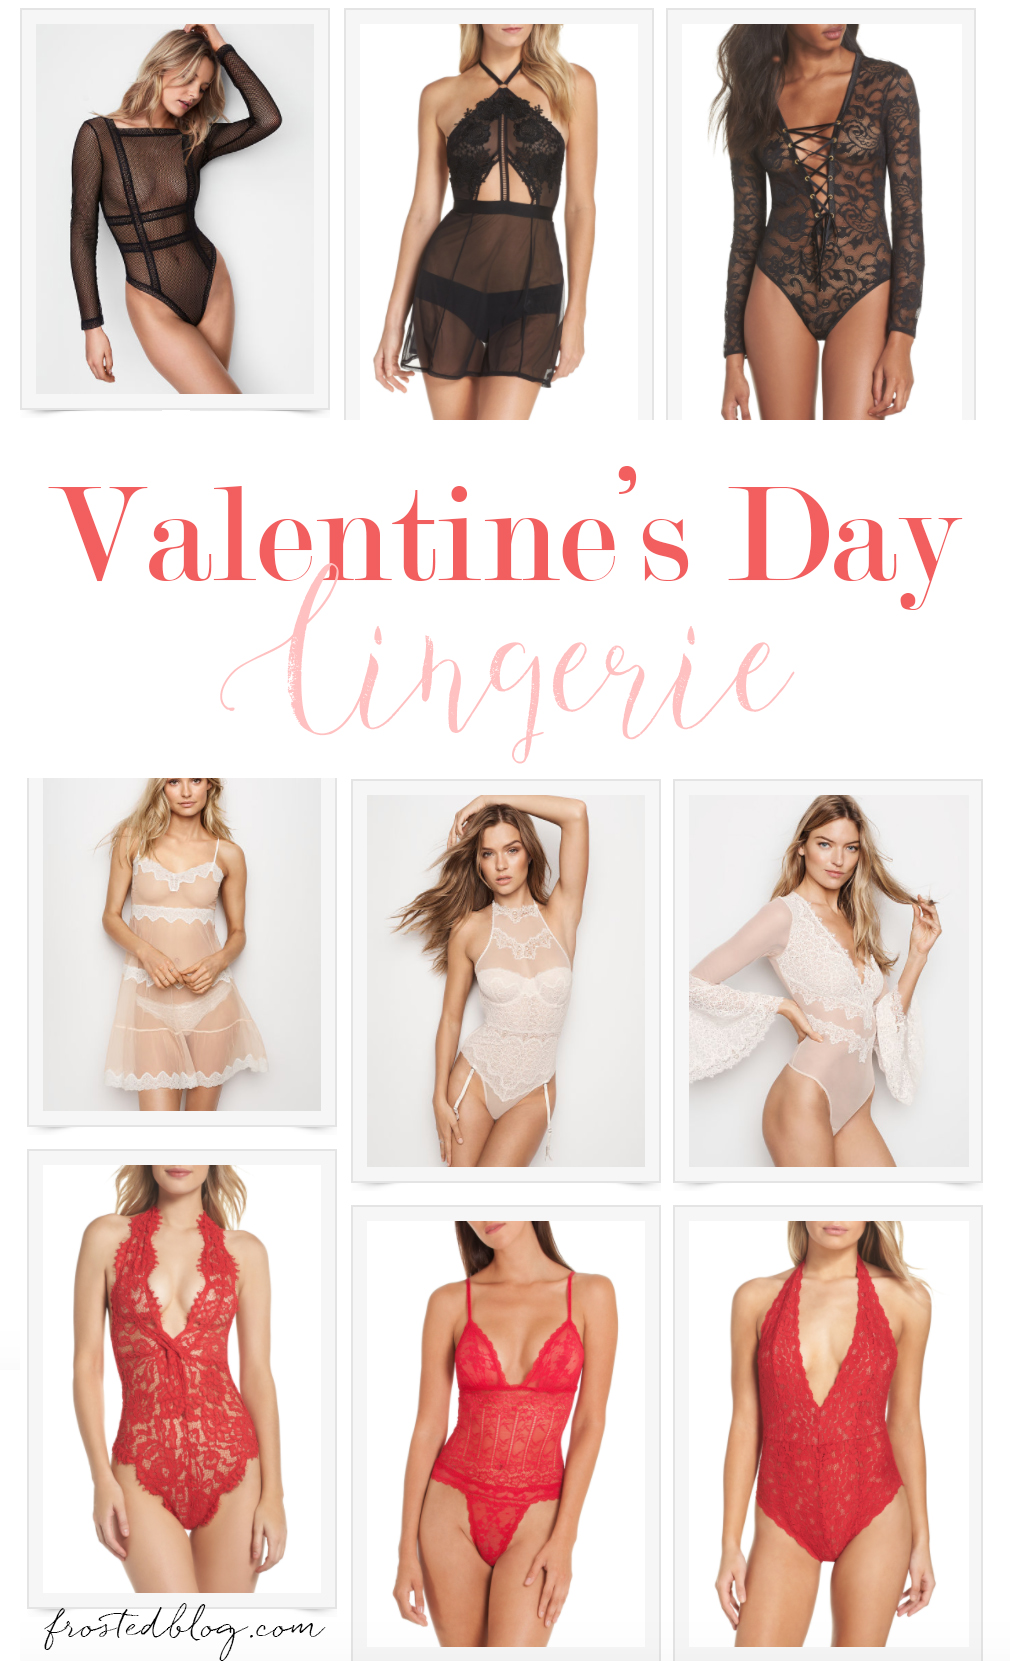 XZNGL Lingerie for Women Sexy Body Suits Womens Sexy Lingerie Lace